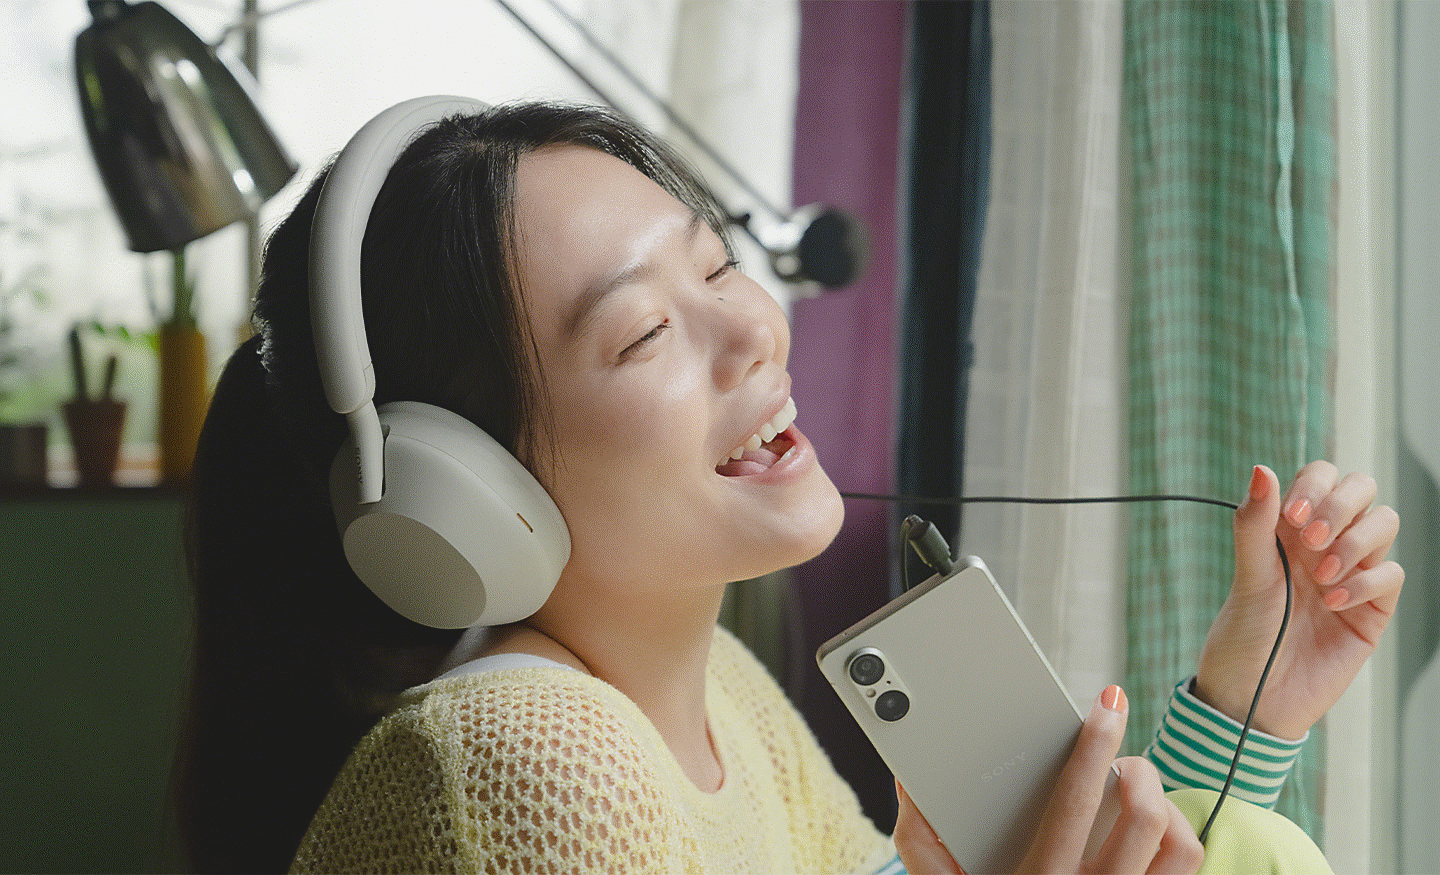 Image of a person singing whilst listening to a pair of Sony headphones connected to an Xperia phone via a cable